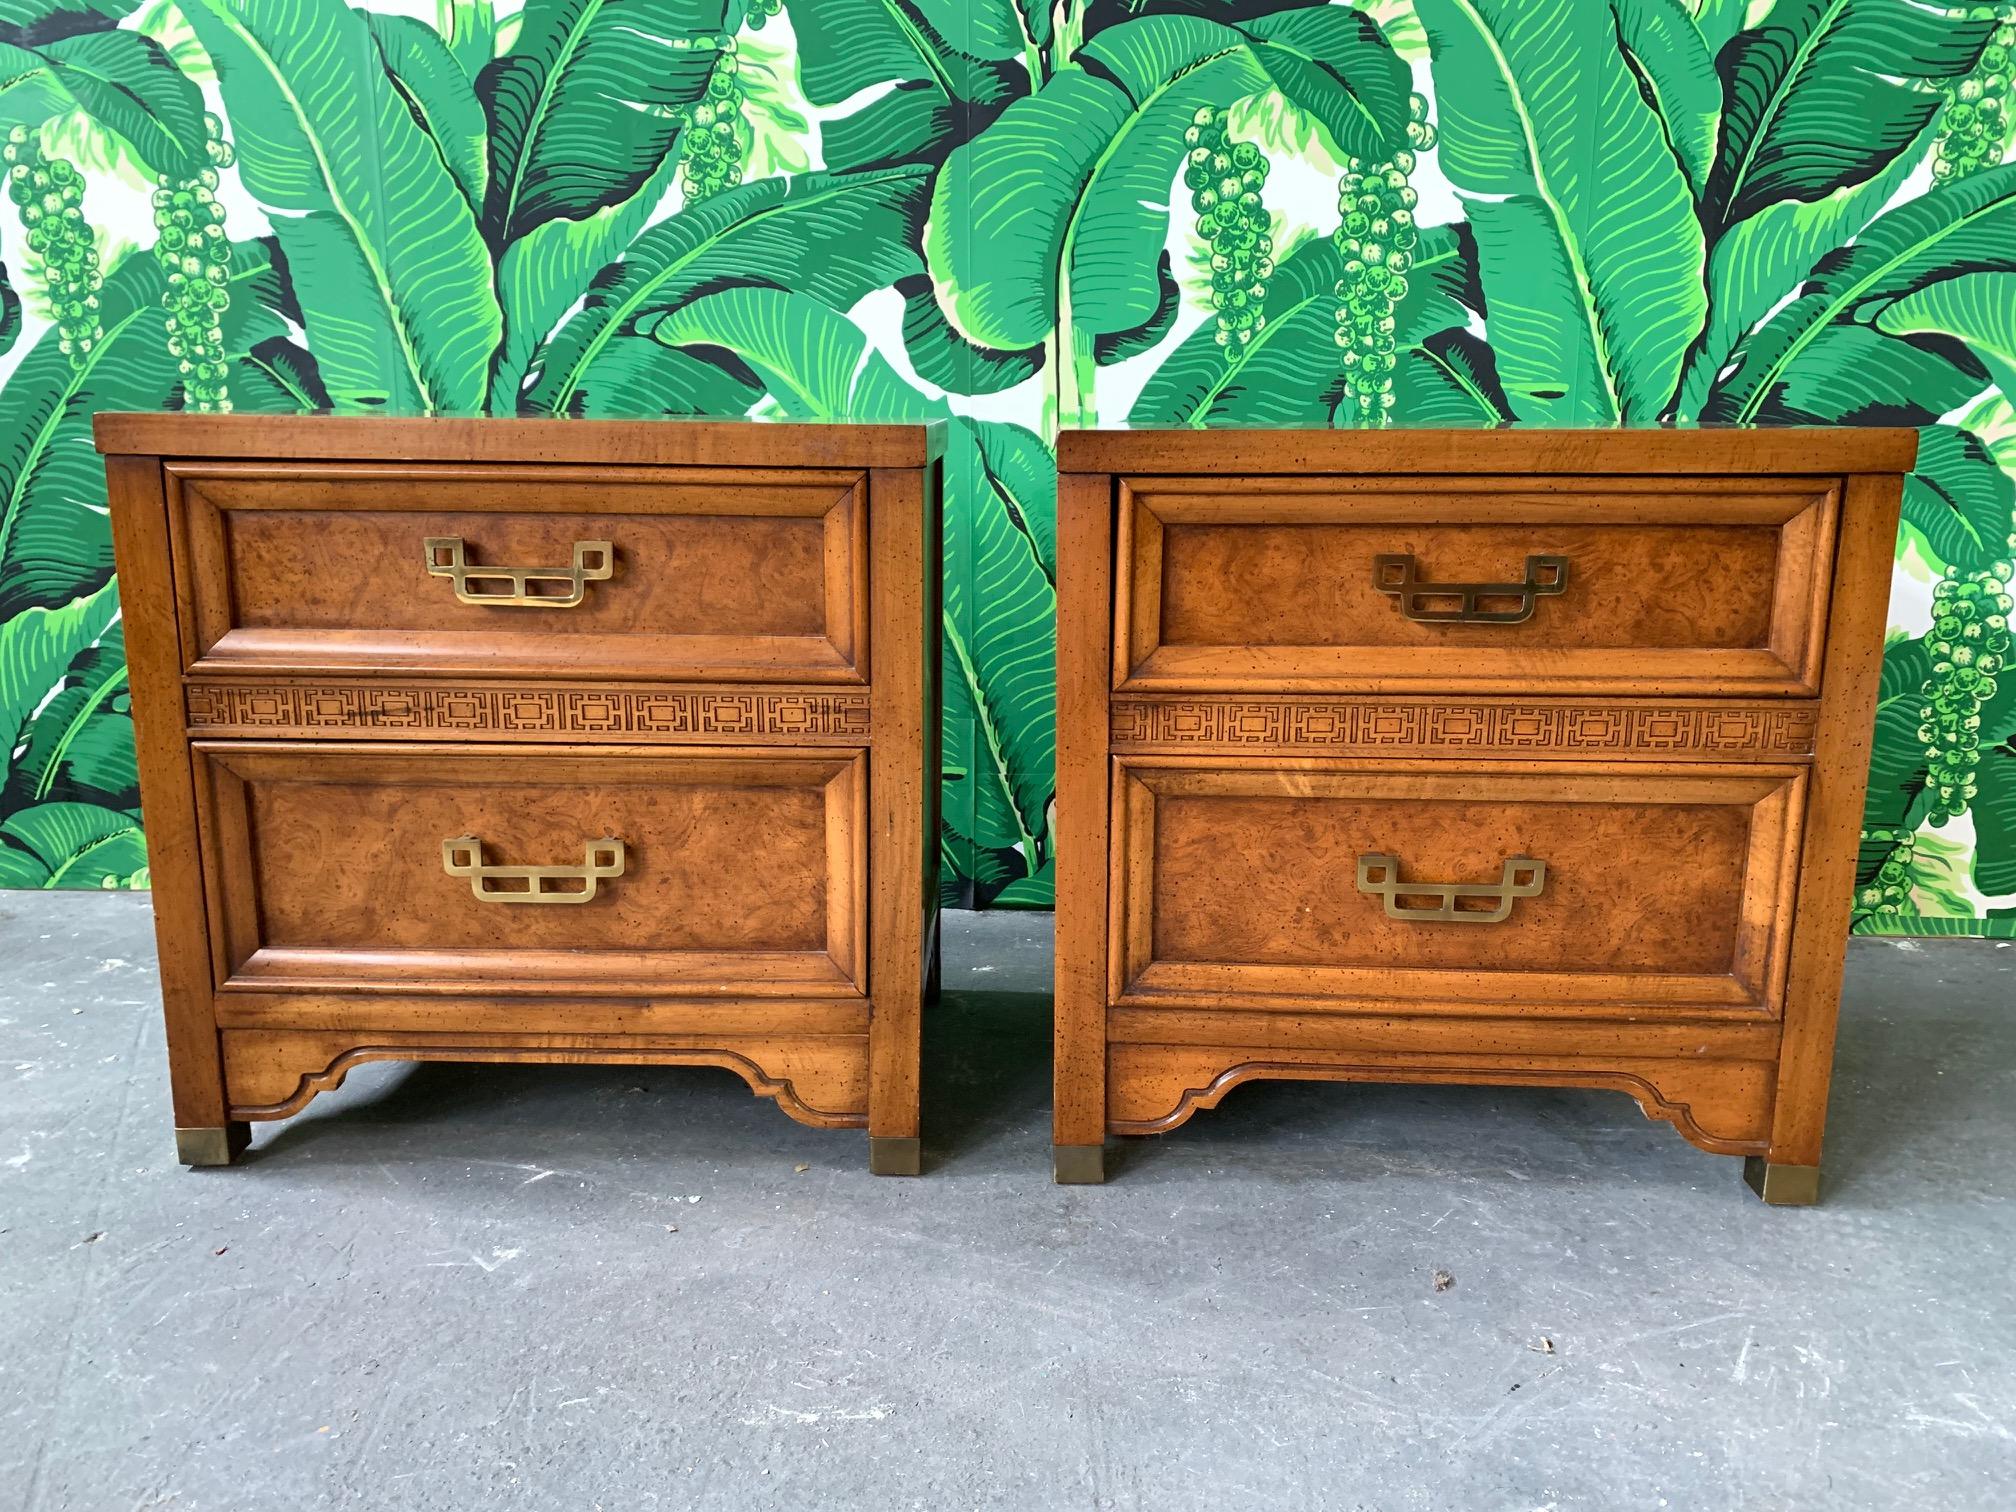 Pair of night stands by Henry Link from the Mandarin collection feature burl drawer faces and brass hardware. Very good vintage condition with only very minor signs of age appropriate wear. Matching dresser and bed also available on our other